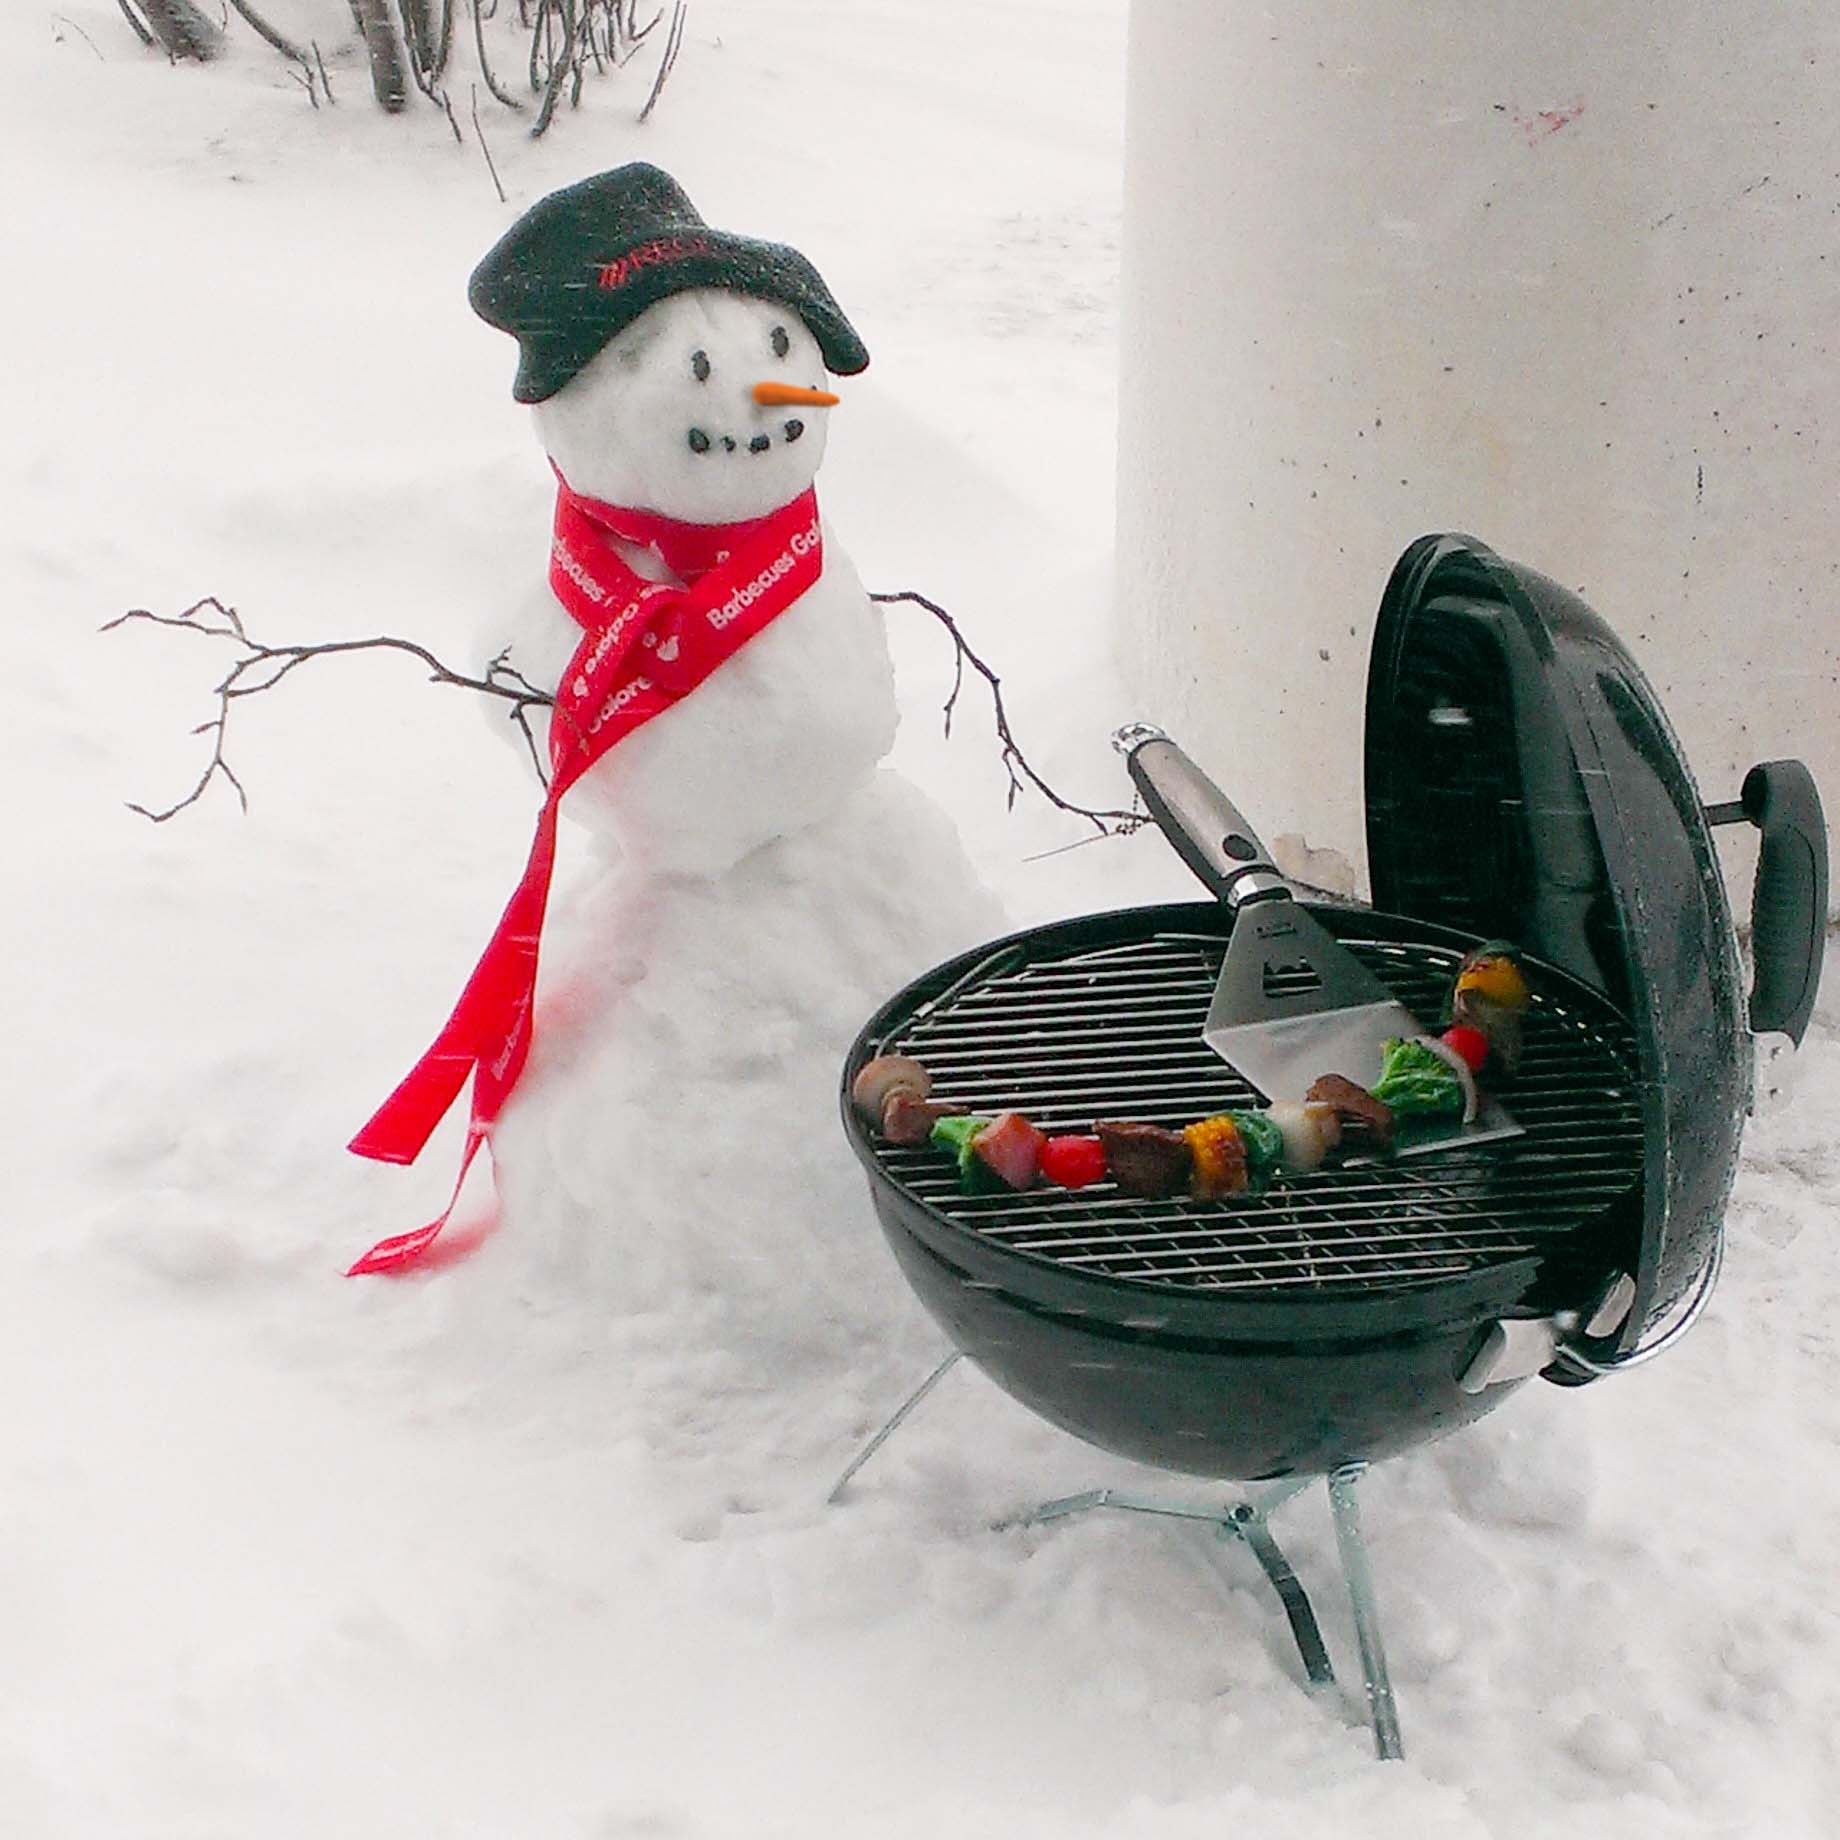 How To Store a BBQ Grill For Winter - Best Way To Store Barbecue